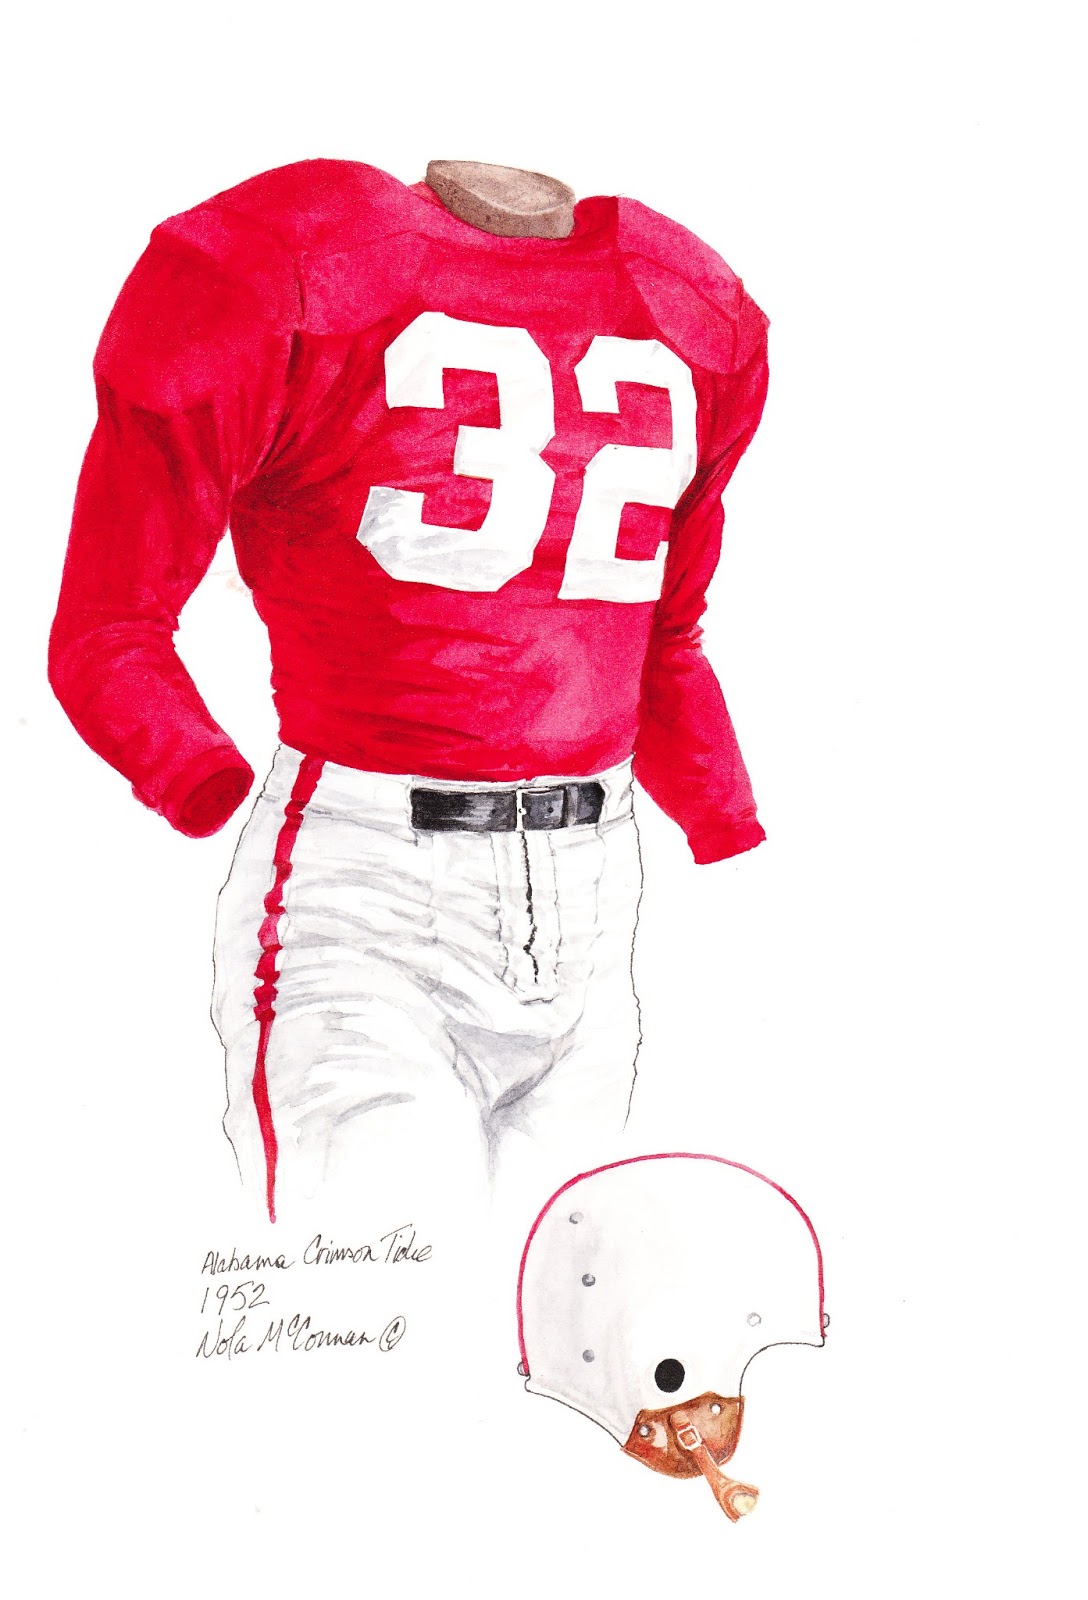 famous alabama jersey numbers